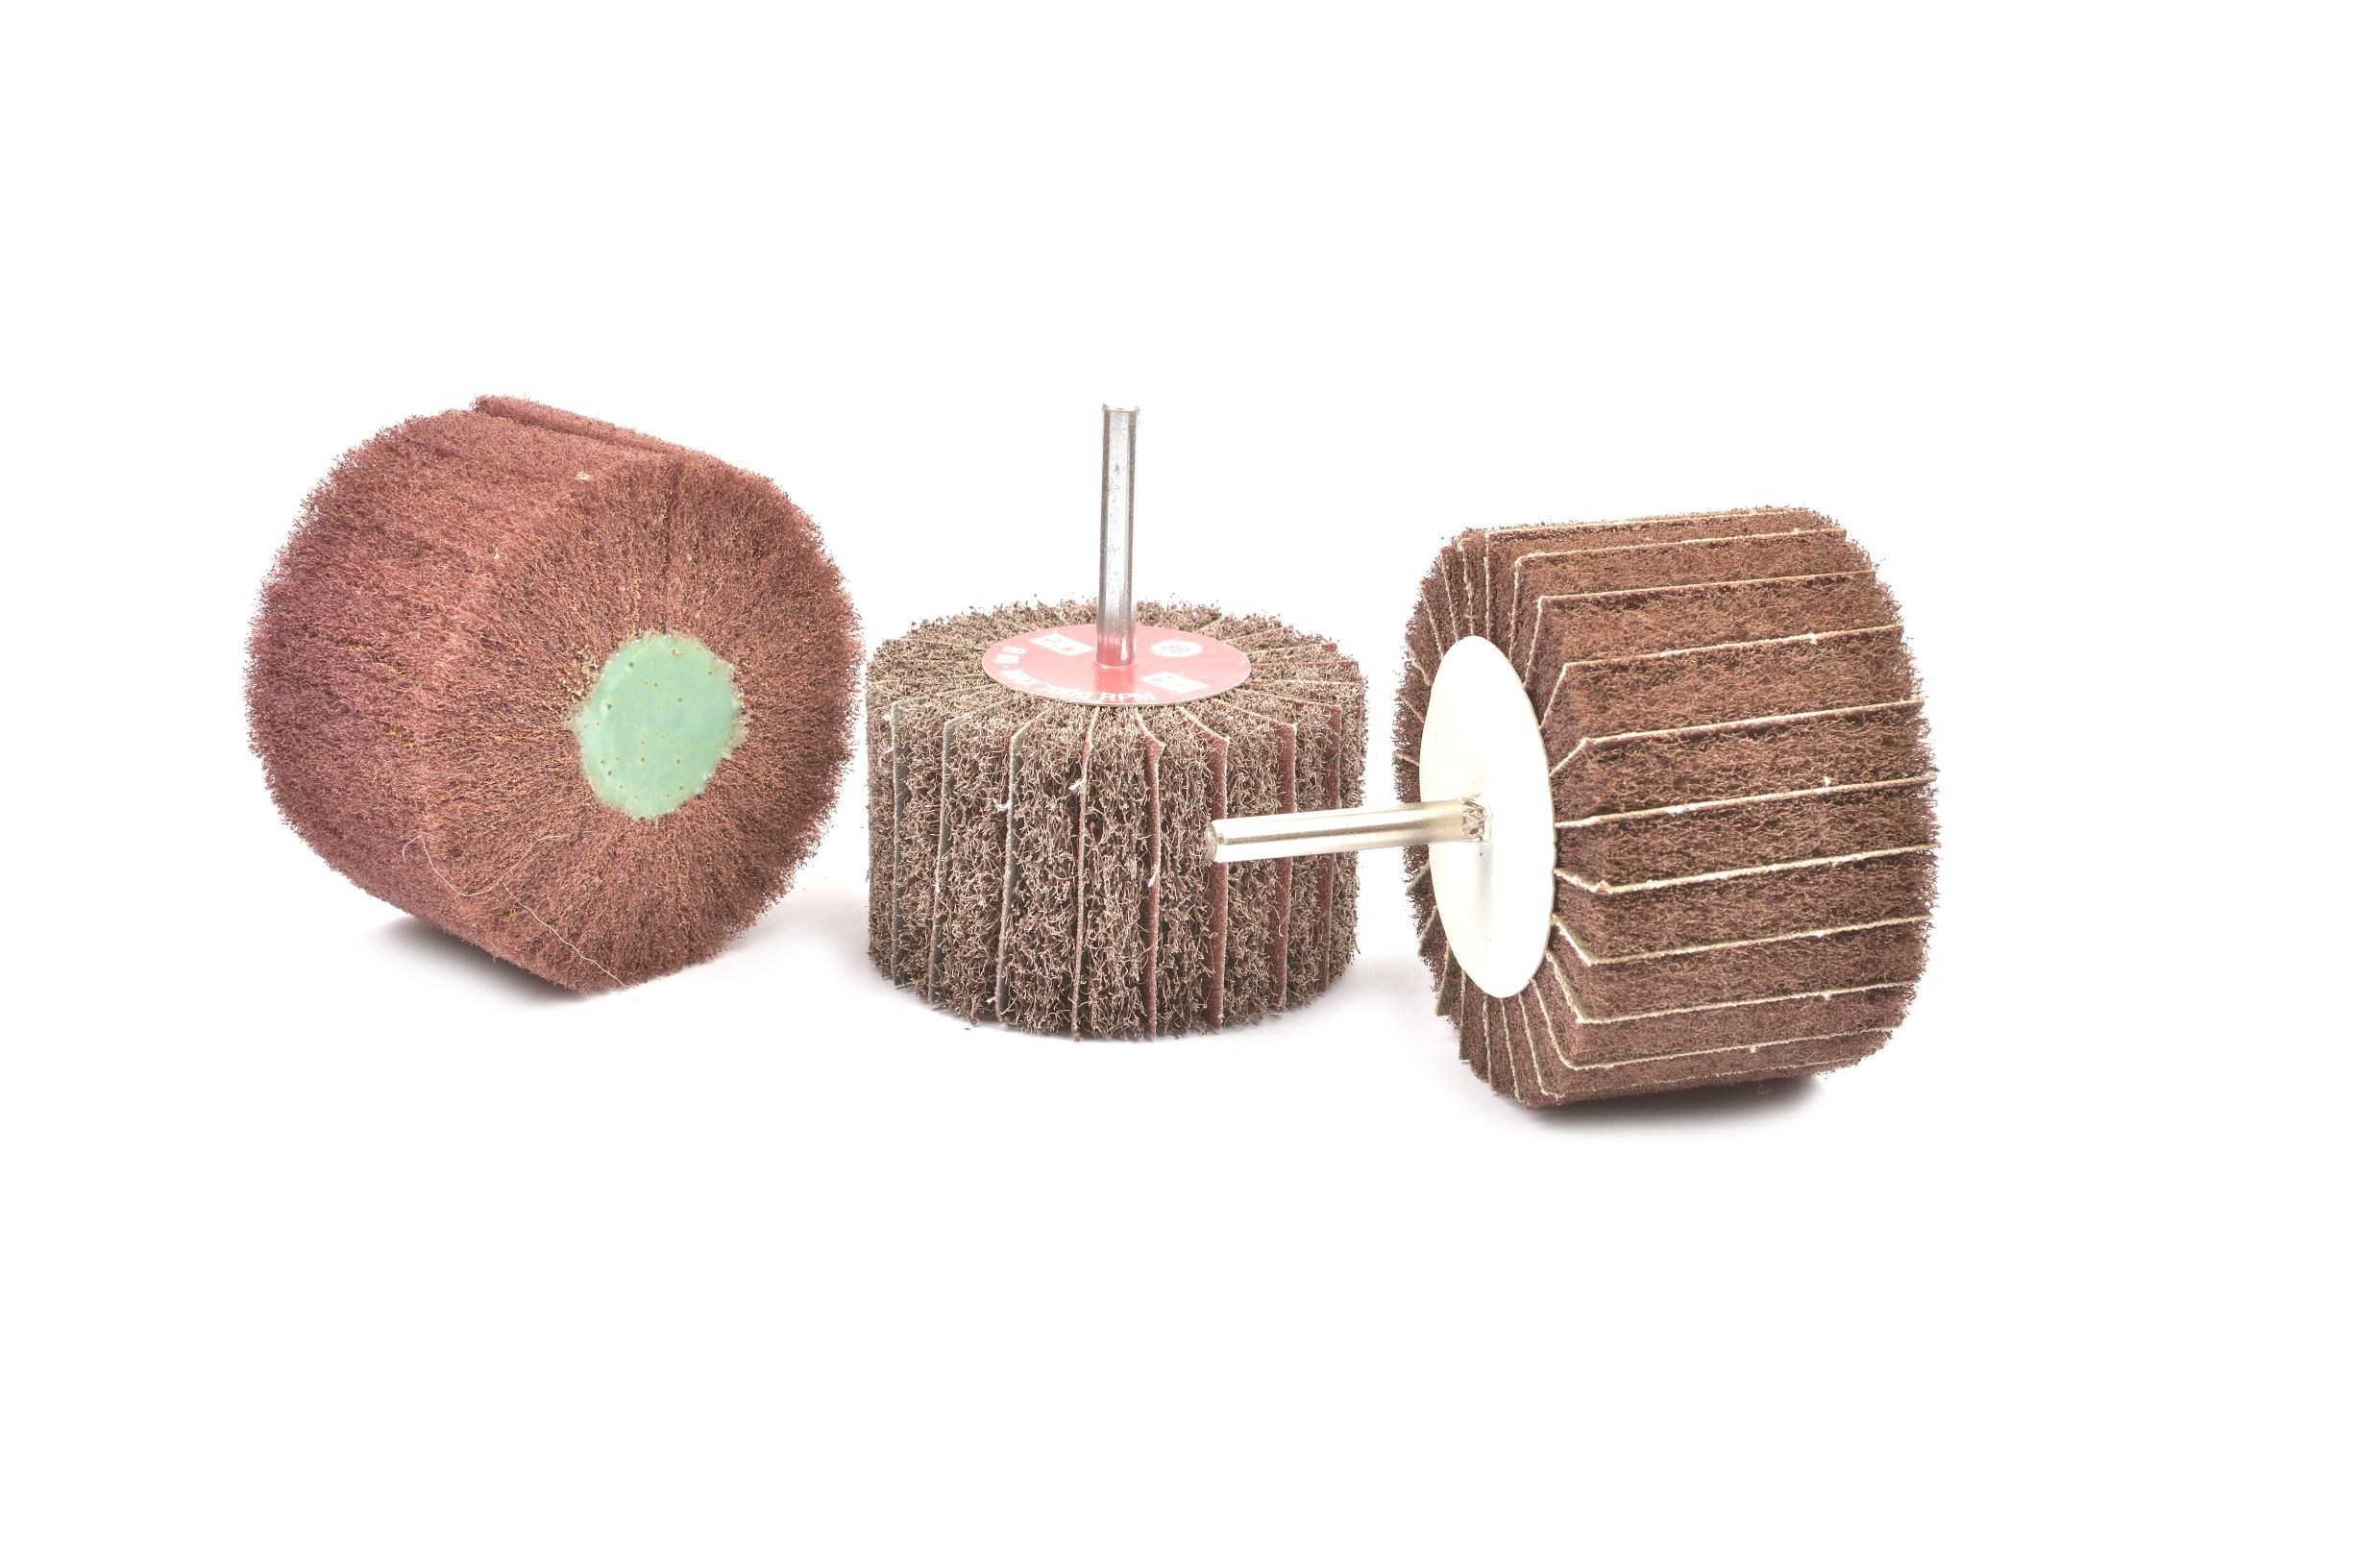 Abrasive Flap Wheel Sander 2"x1" x 1/4" Shank Mounted Non-woven Interleaves for Drill Grit 40/60/80x2/120